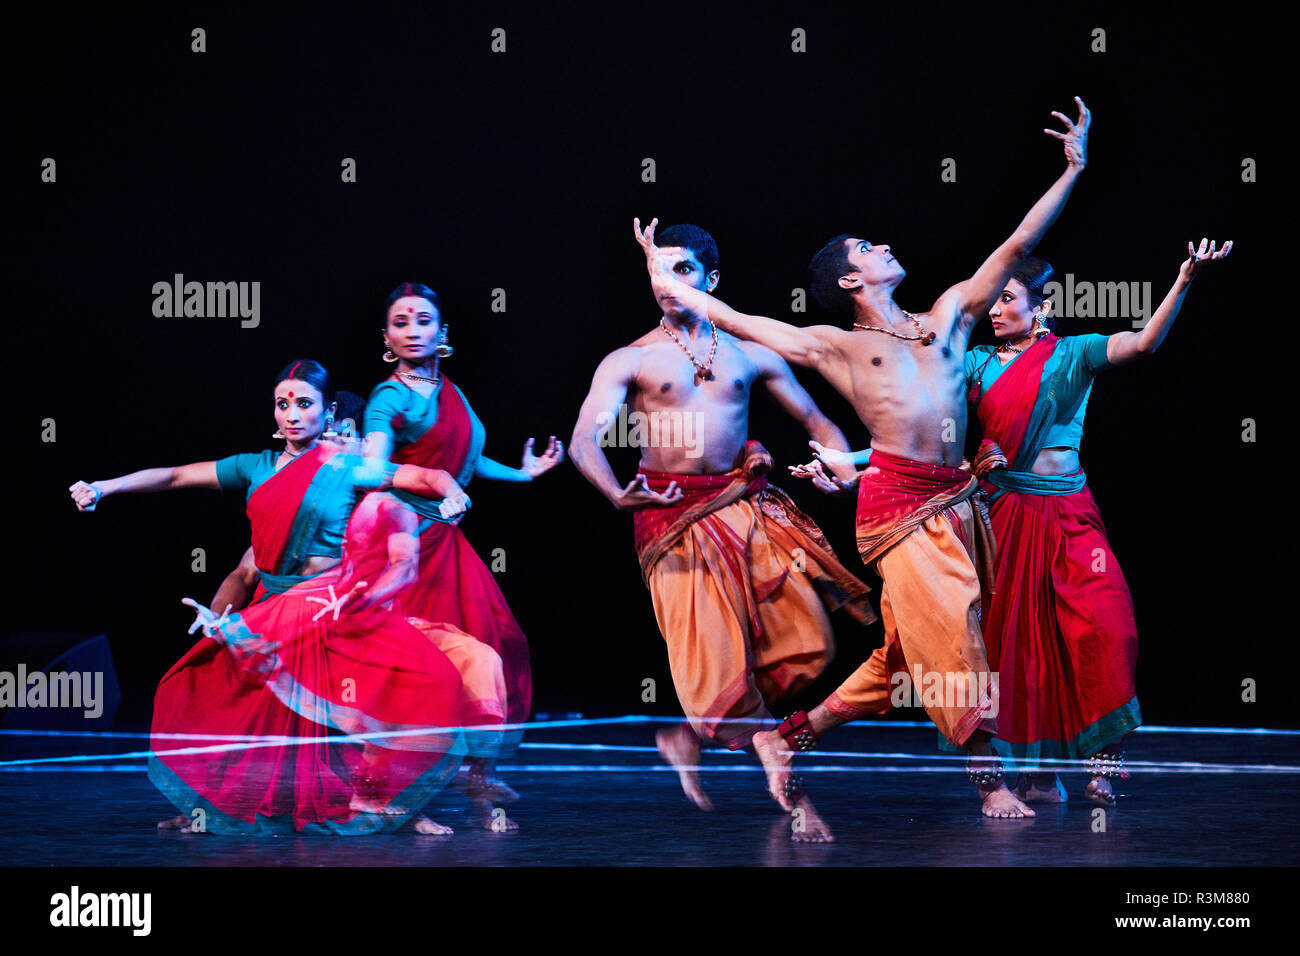 London, UK. 23rd Nov 2018. In its second year at Sadler’s Wells, Darbar Festival welcomes some of the most exciting names in classical Indian dance, curated by Sadler’s Wells Associate Artist Akram Khan. In the first performance of the festival, Renjith Babu and Neha Mondal Chakravarty present “An Evening of Bharatanatyam” by the bharatanatyam and contemporary artist Mavin Khoo. The second evening of the programme, “Adventures in Odissi and Kathak”, combines two classical Indian dance forms in solo performances by Sujata Mohapatra and Gauri Diwakar.  Credit: ambra vernuccio/Alamy Live News Stock Photo